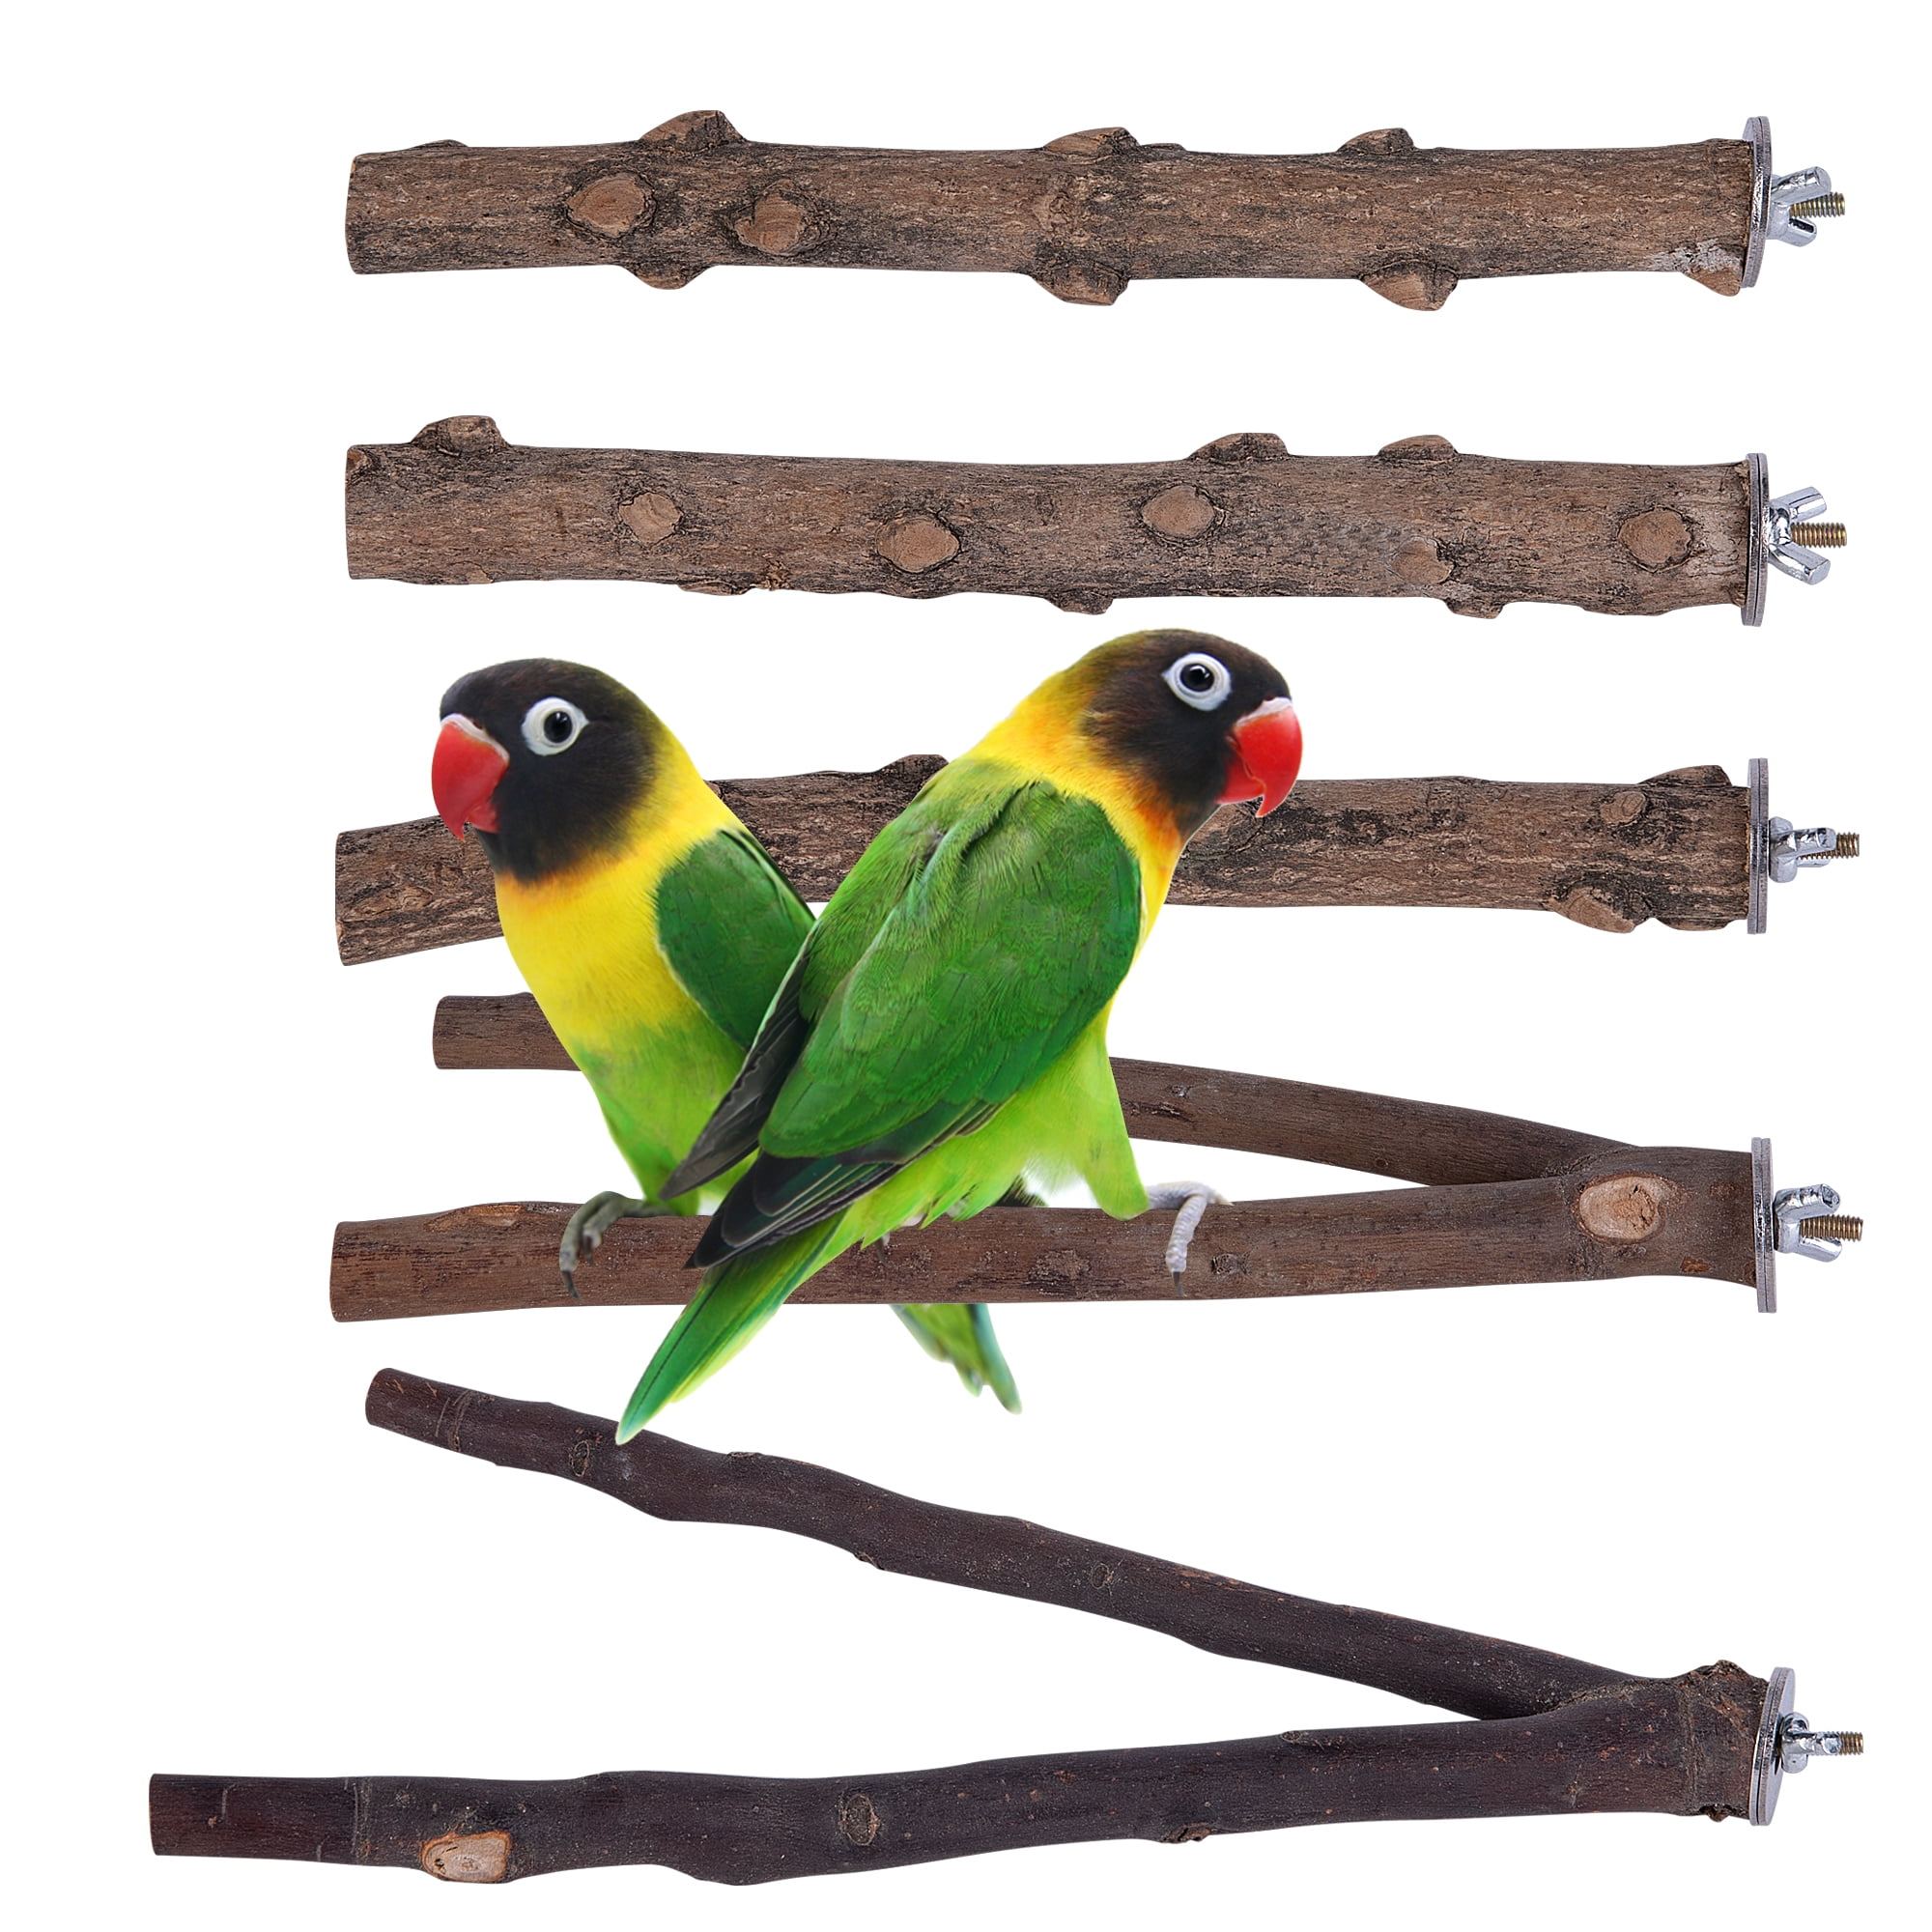 5 Pcs Bird Perches Parrot Stand Natural Wood Prickly Perch Parrot Toys Bird Cage Accessories for Conure Cockatiel Parakeet 16″ 12″ 8″ 6″ 4″ 